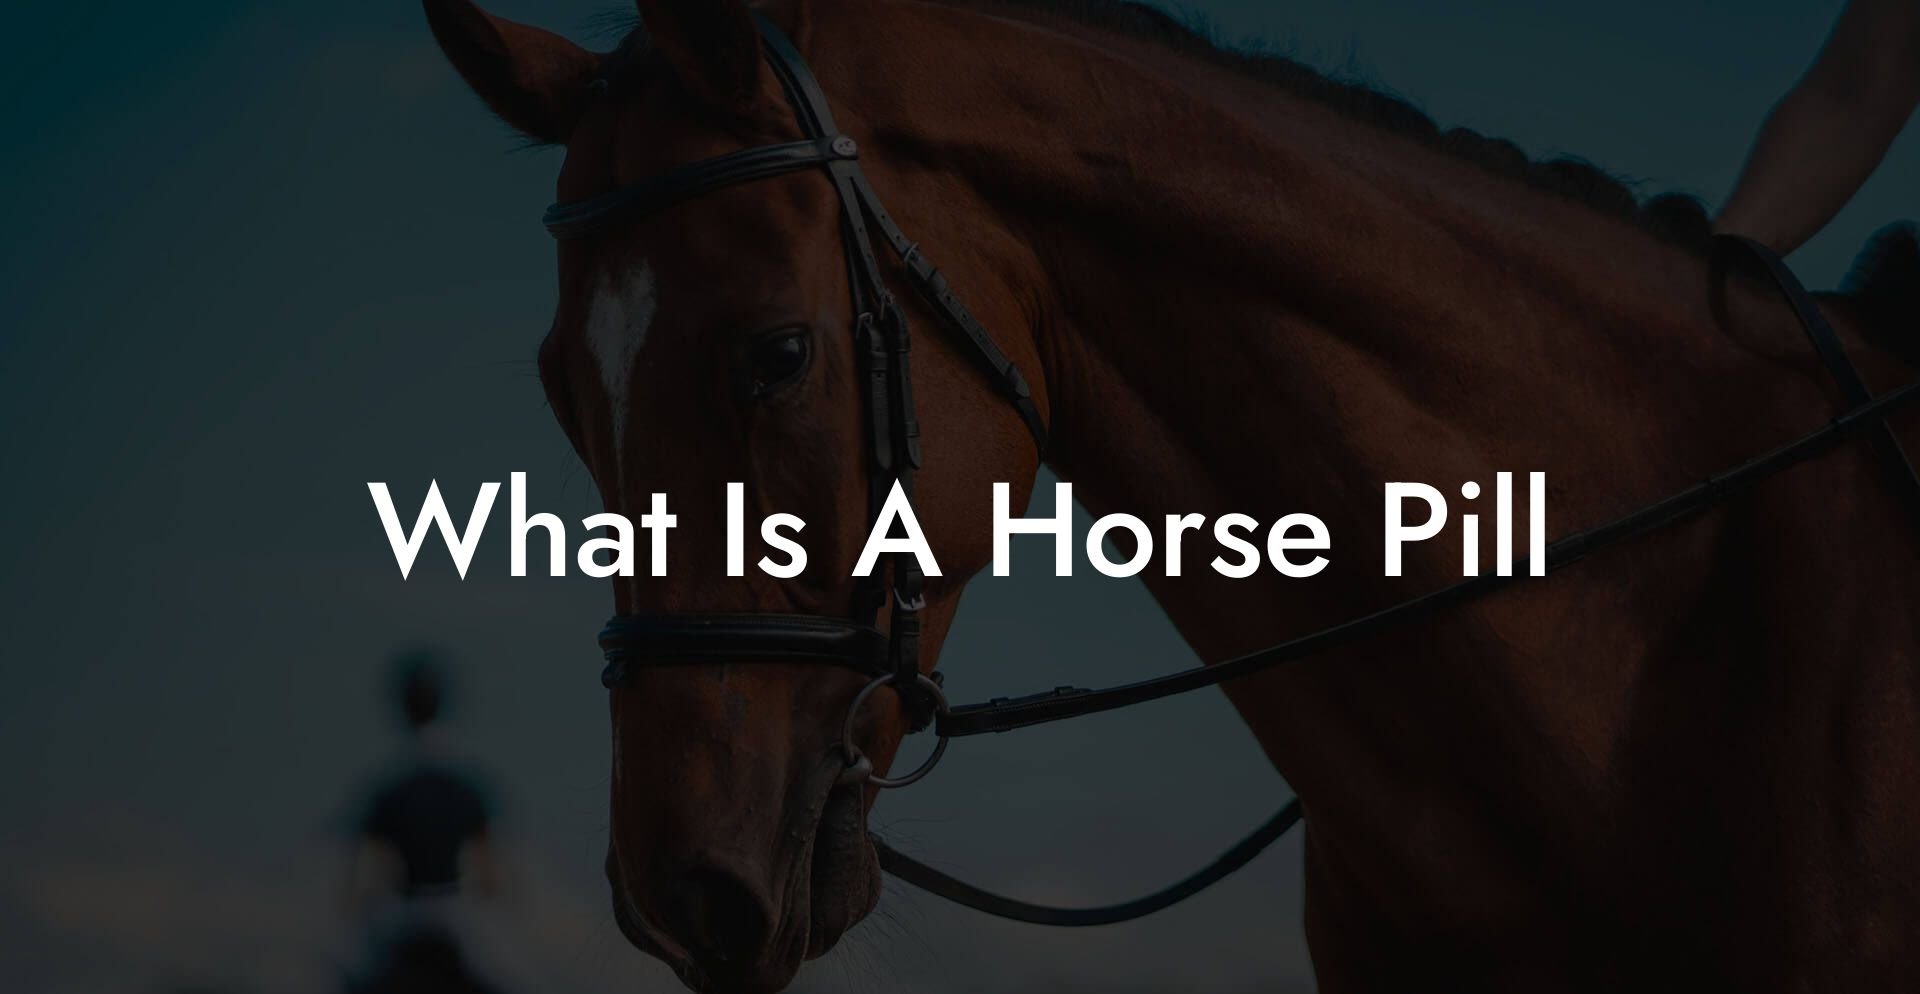 What Is A Horse Pill